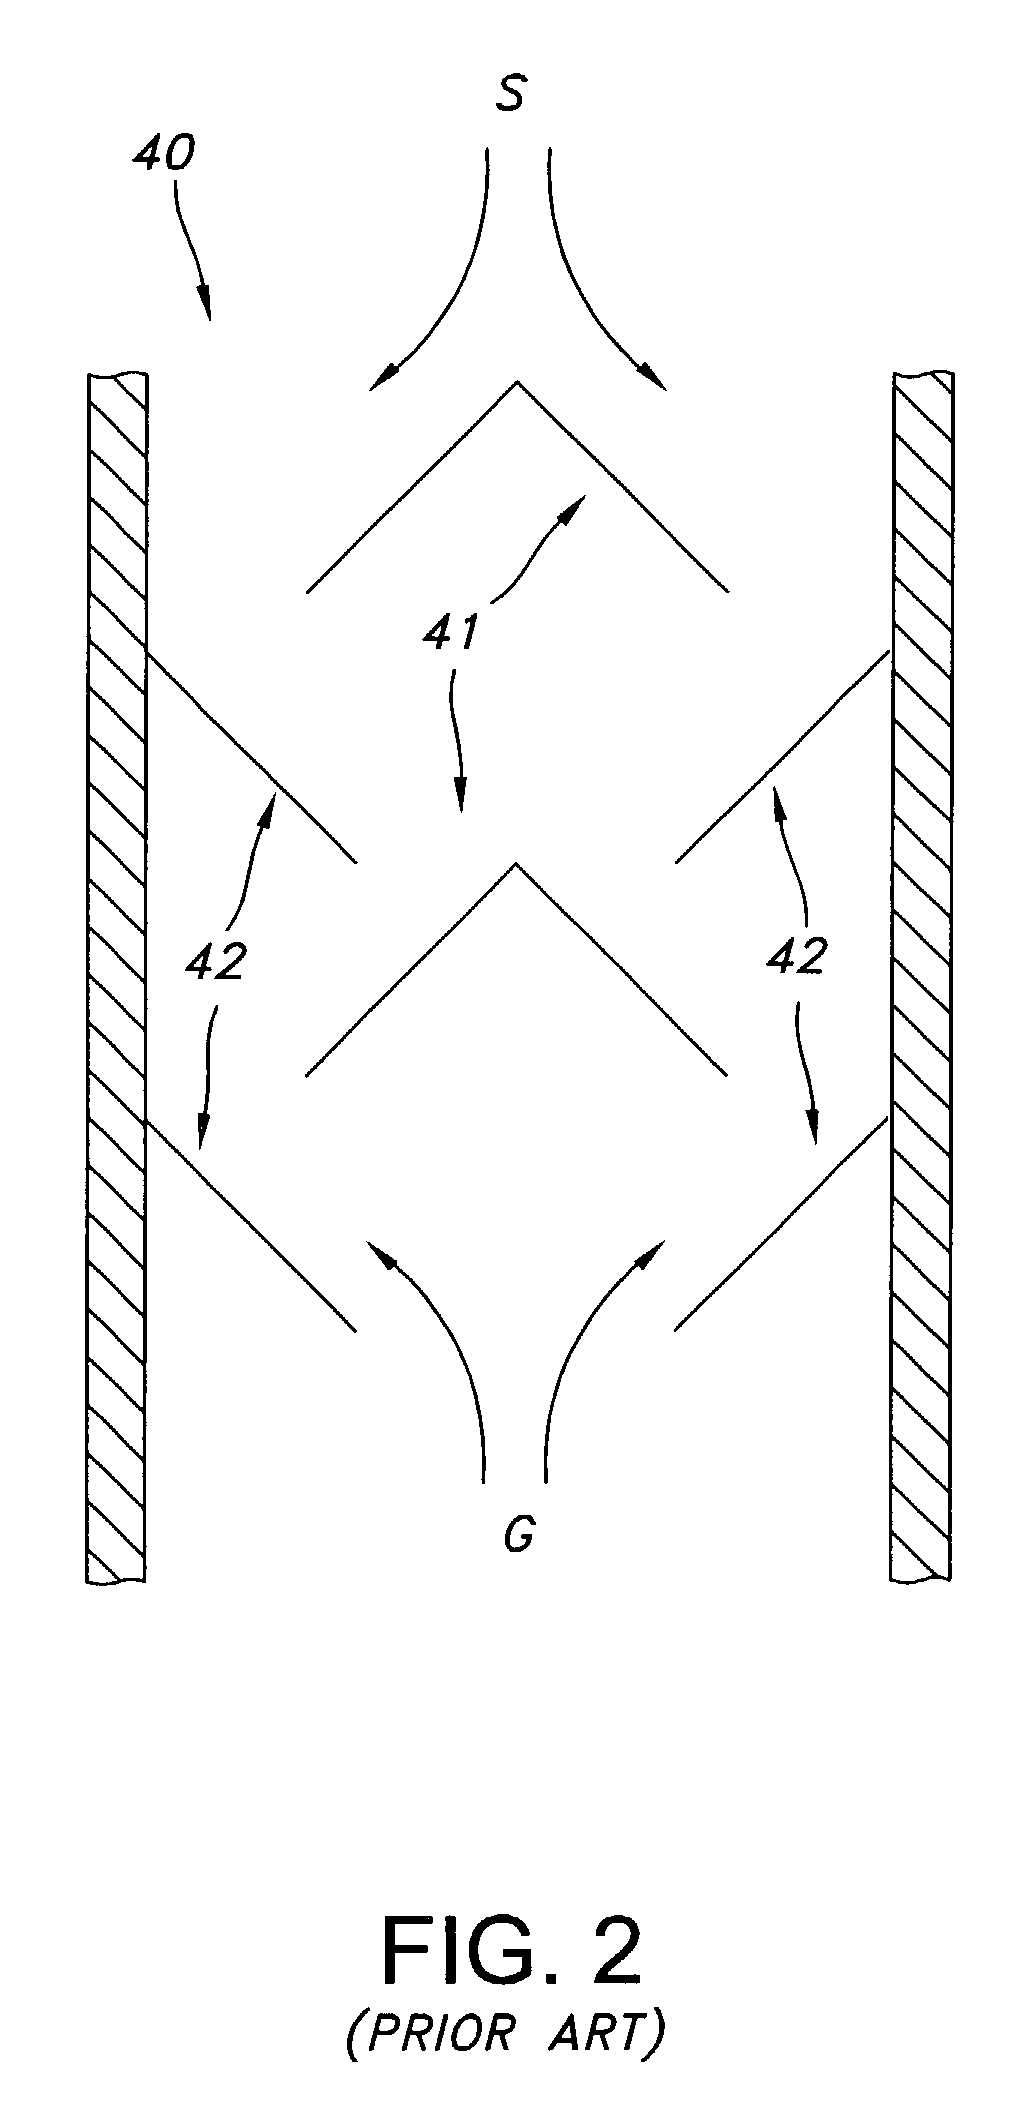 Apparatus for countercurrent contacting of gas and solids